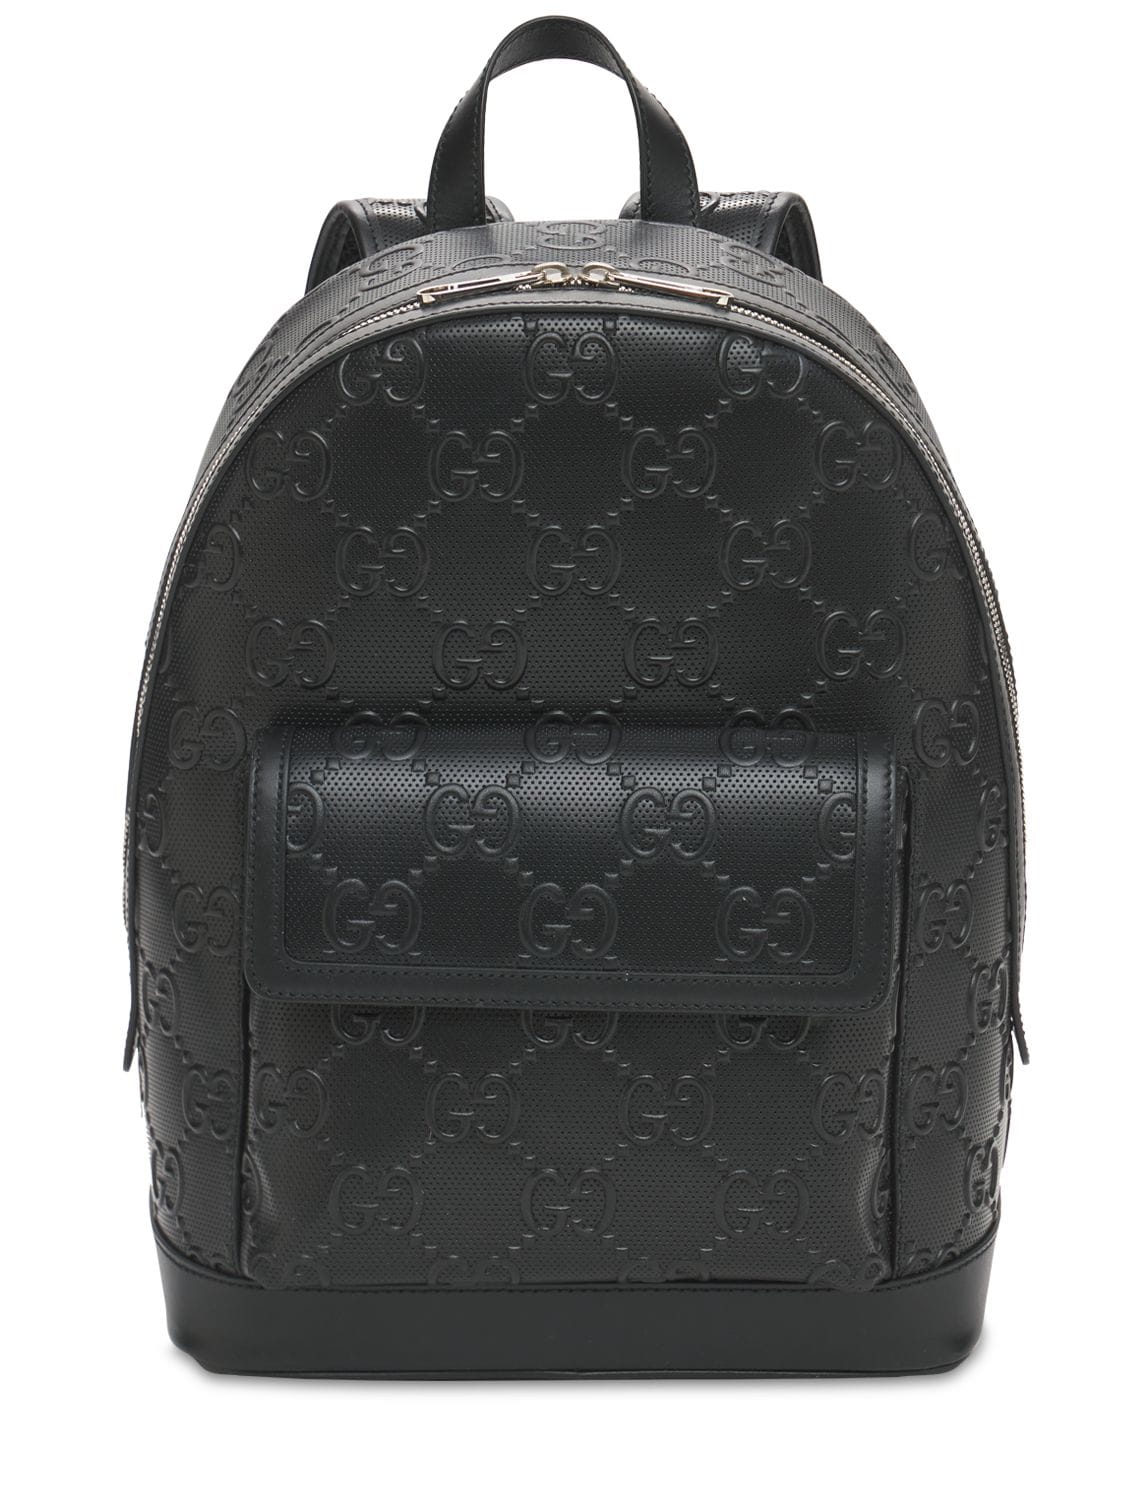 Gg Embossed Leather Backpack